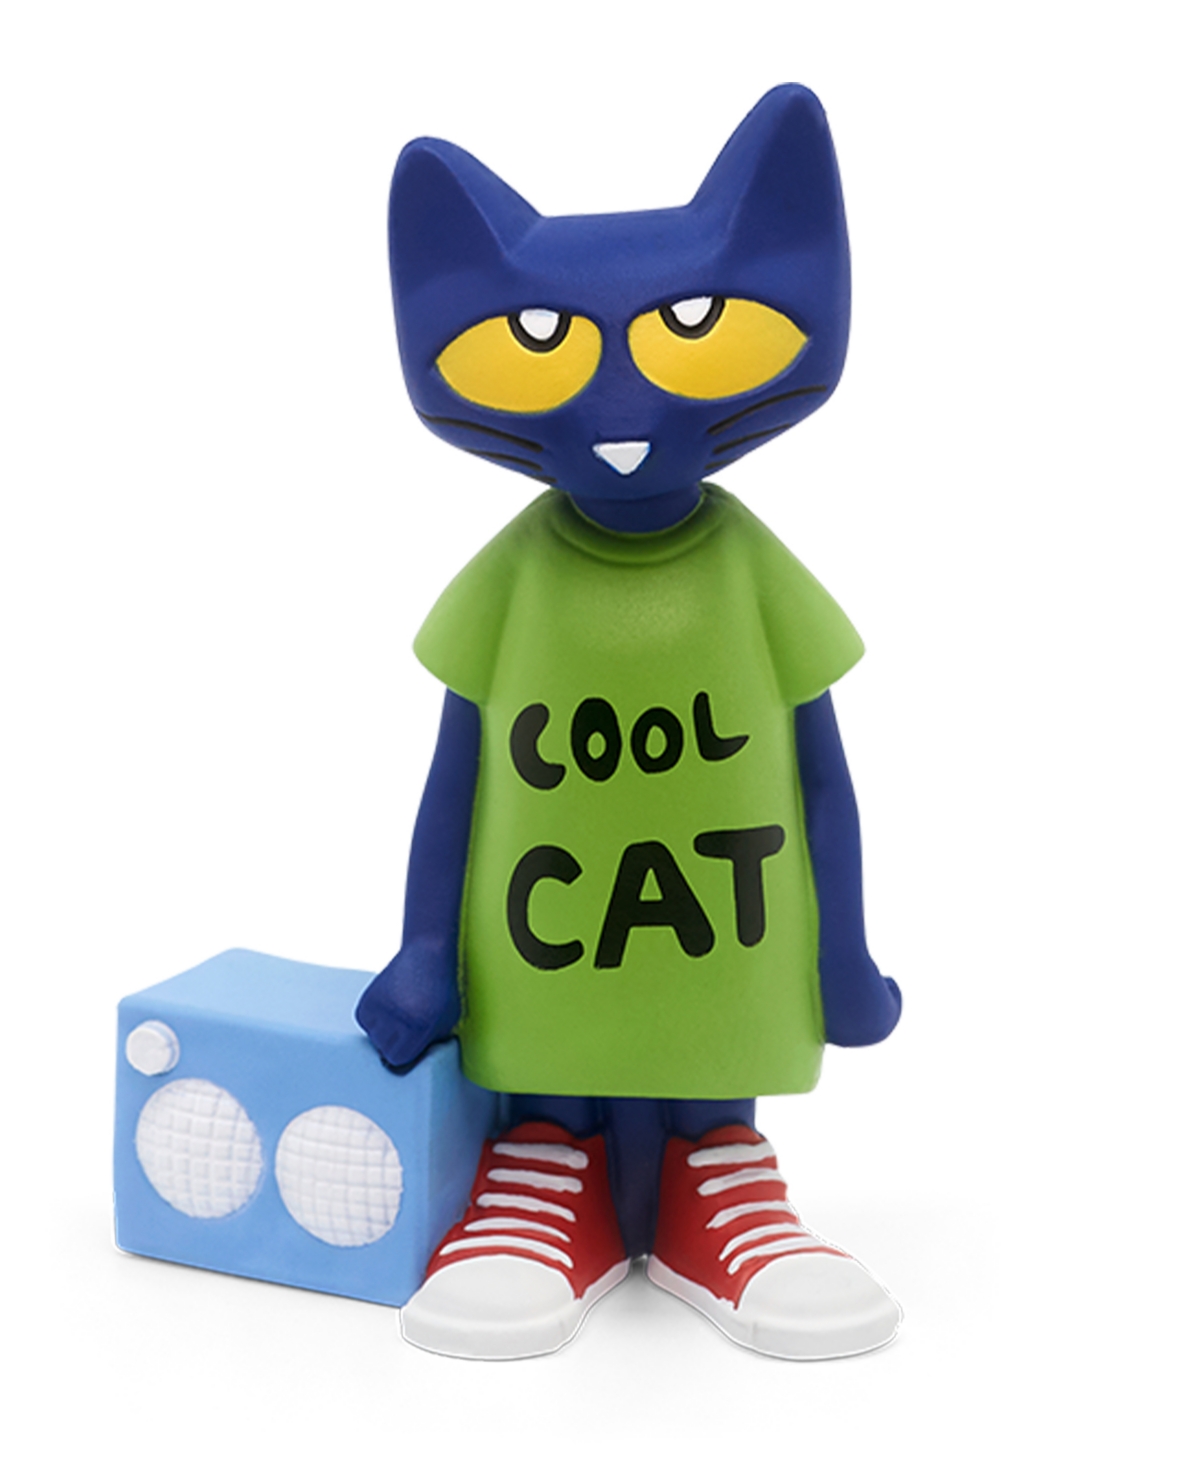 Tonies Kids' Pete The Cat Audio Play Figurine In No Color